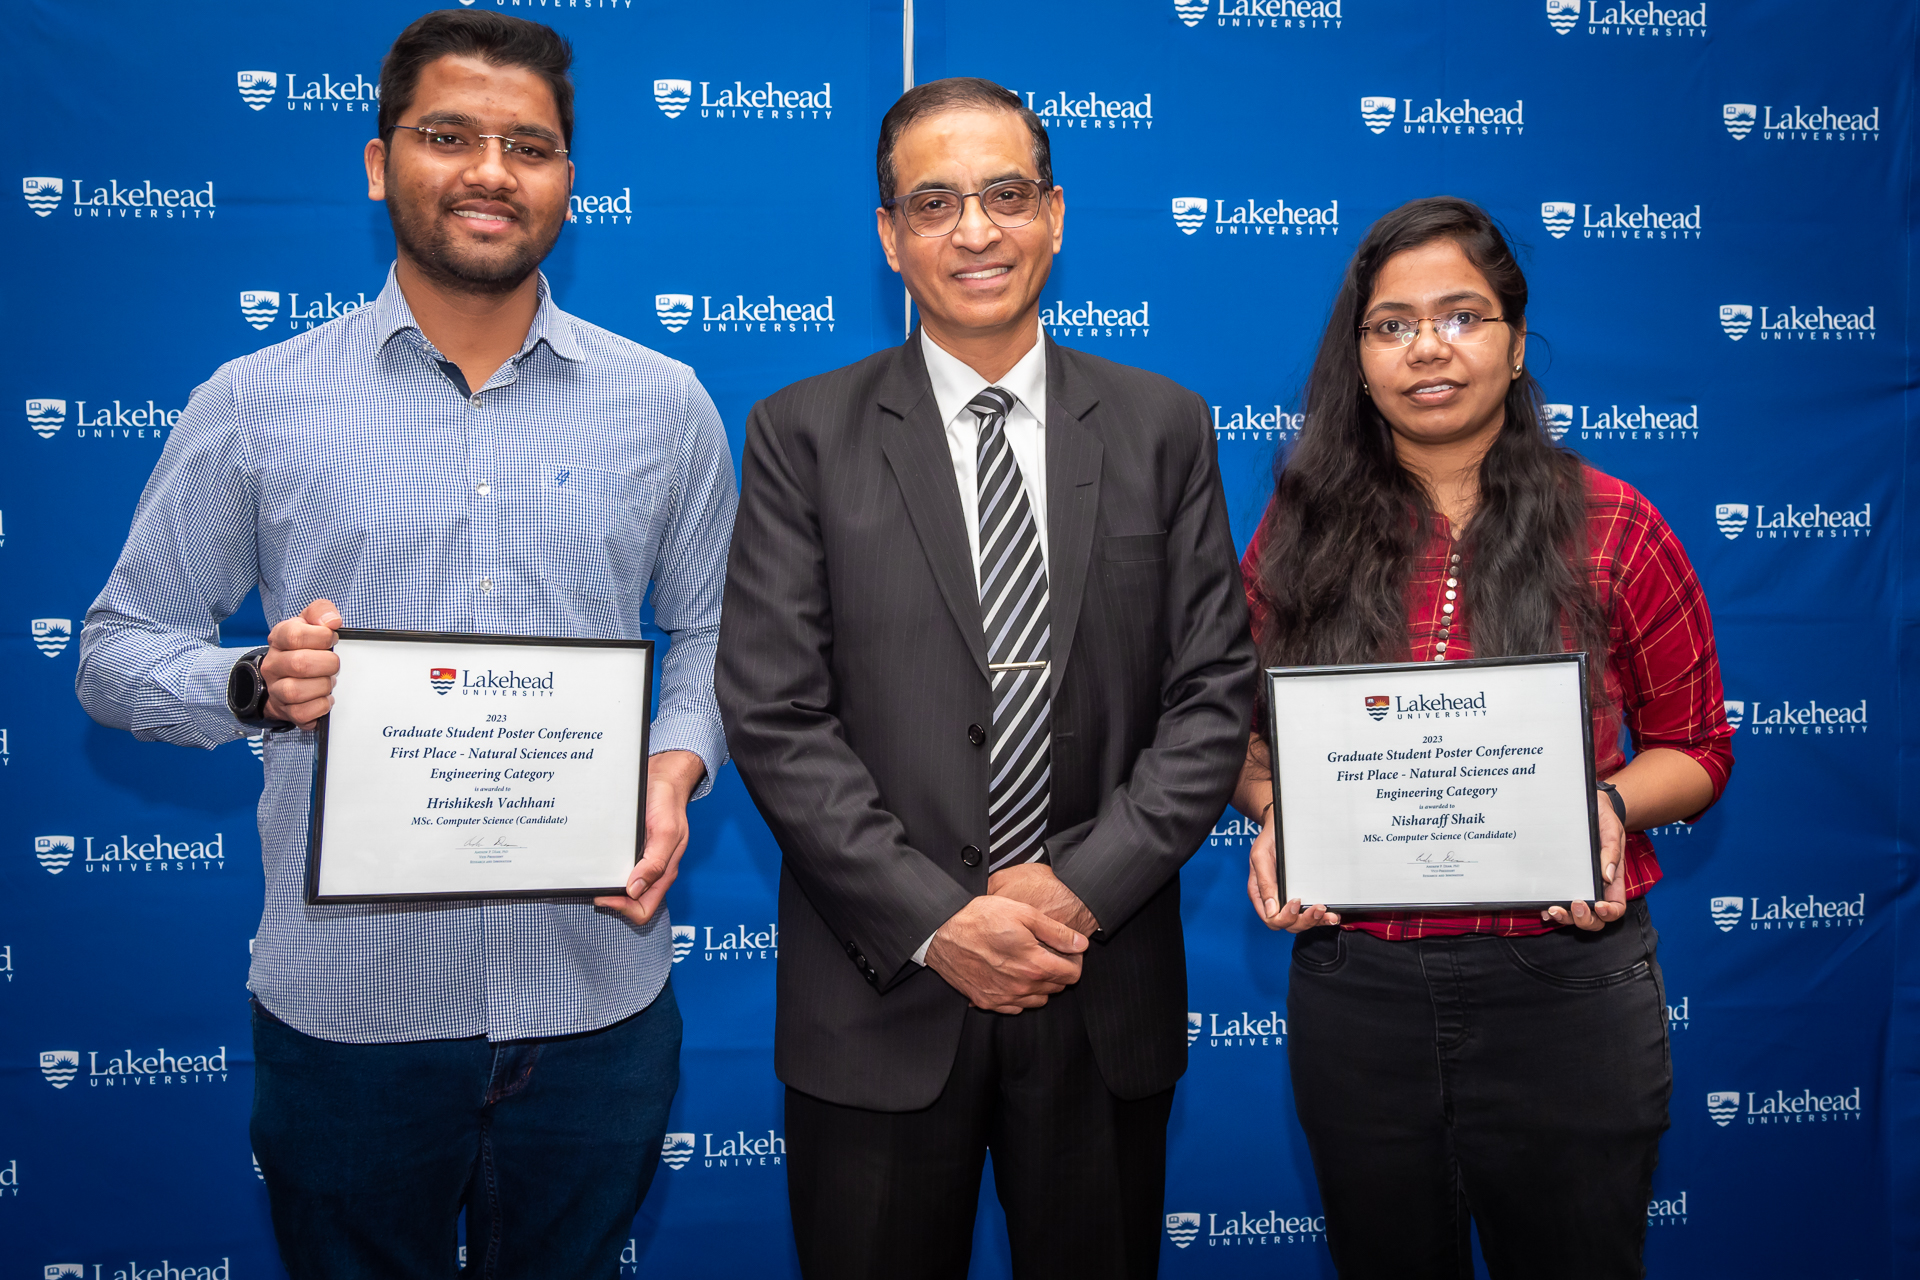 Photo of two of the Graduate Student Conference Poster Winners (NSERC Category) - Hrishikesh Vachhani, MSc Computer Science and Nisharaff Shaik, MSc Computer Science (with Dr. Chander Shahi, Dean, Graduate Studies)